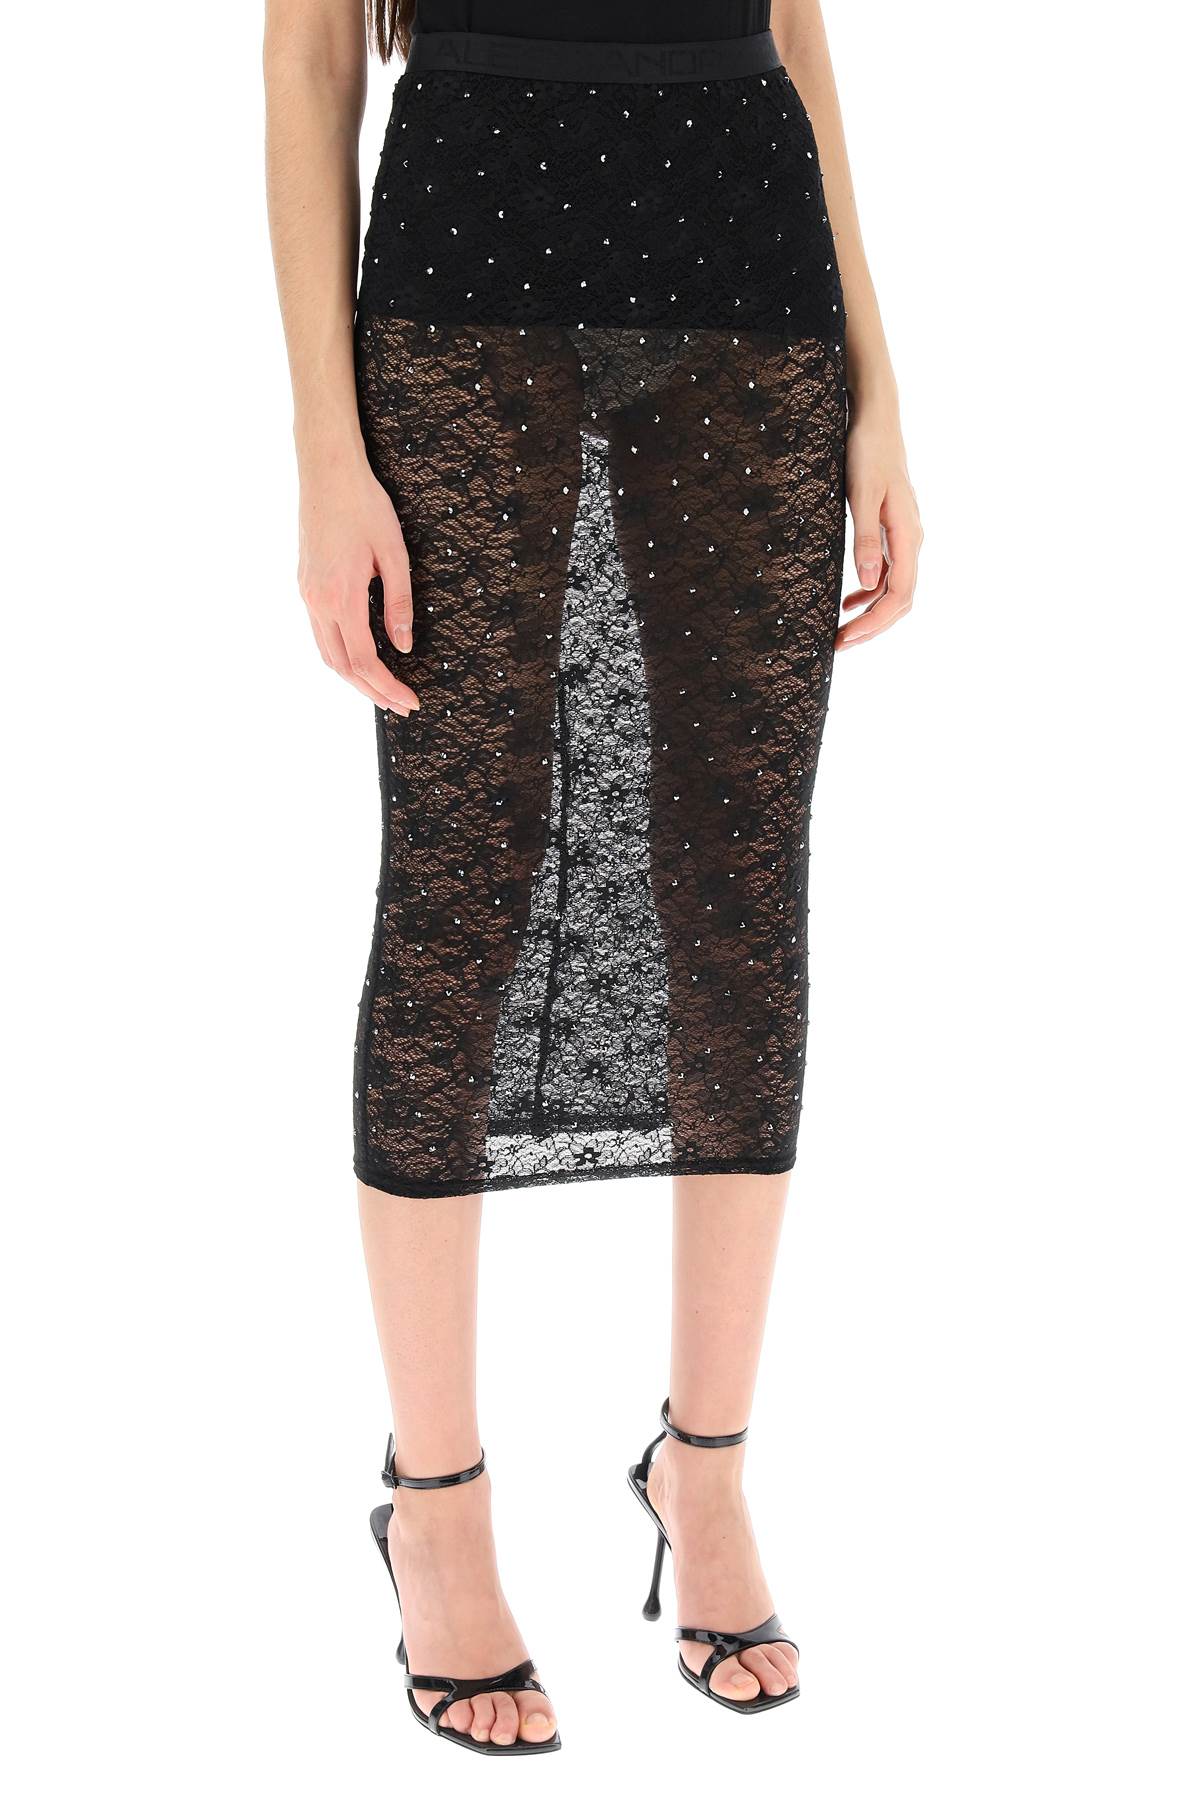 Alessandra rich midi skirt in lace with rhinestones-1